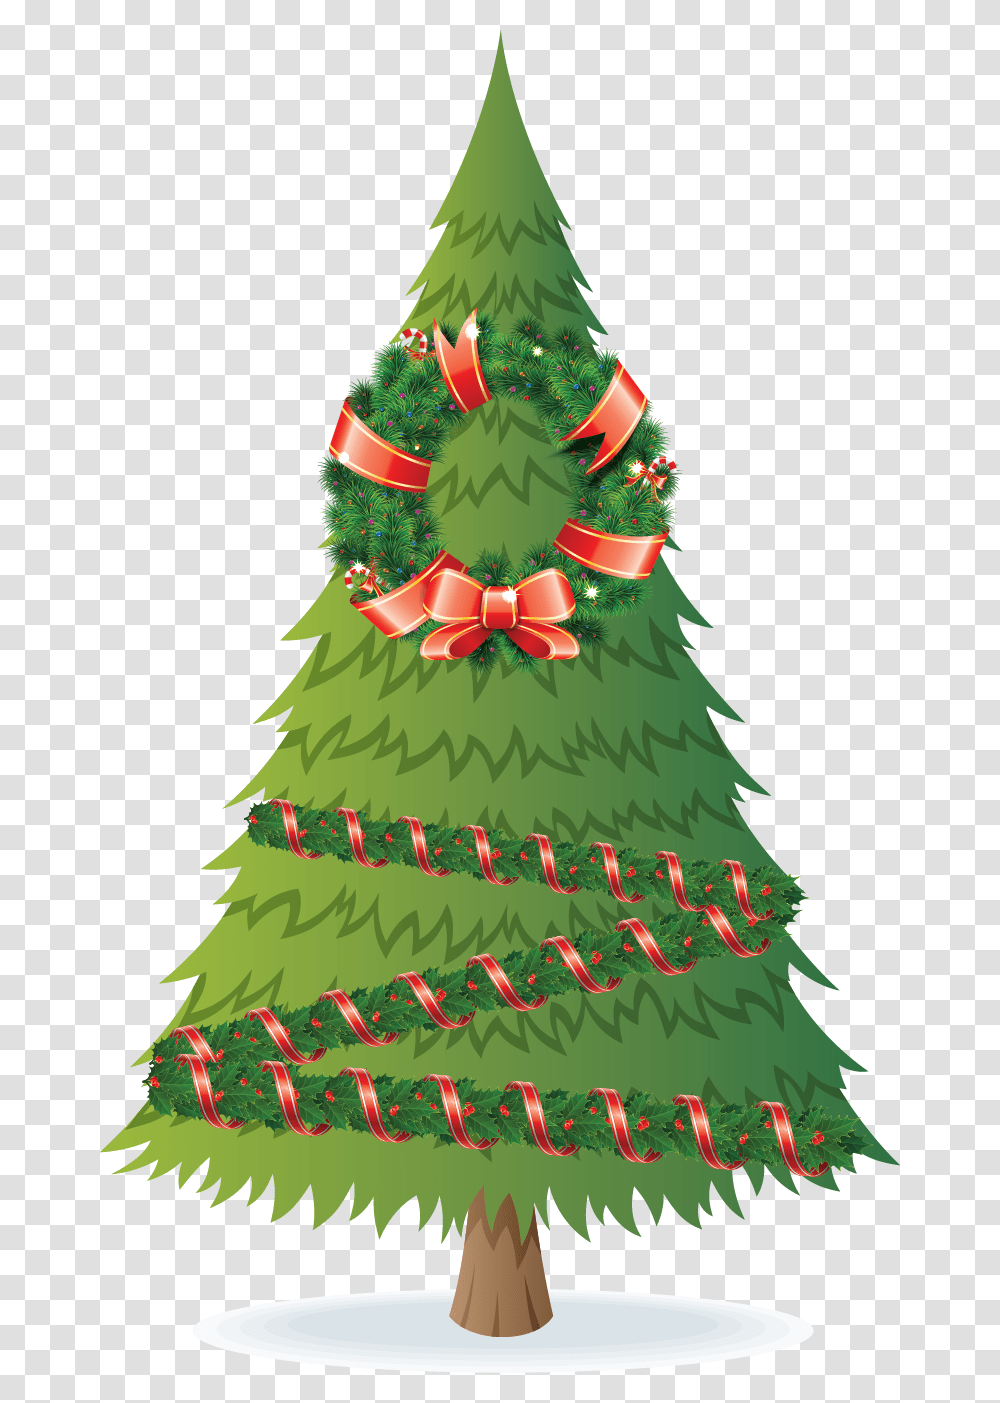 Christmas Tree With Garland And A Wreath Christmas Tree, Plant, Ornament, Star Symbol Transparent Png